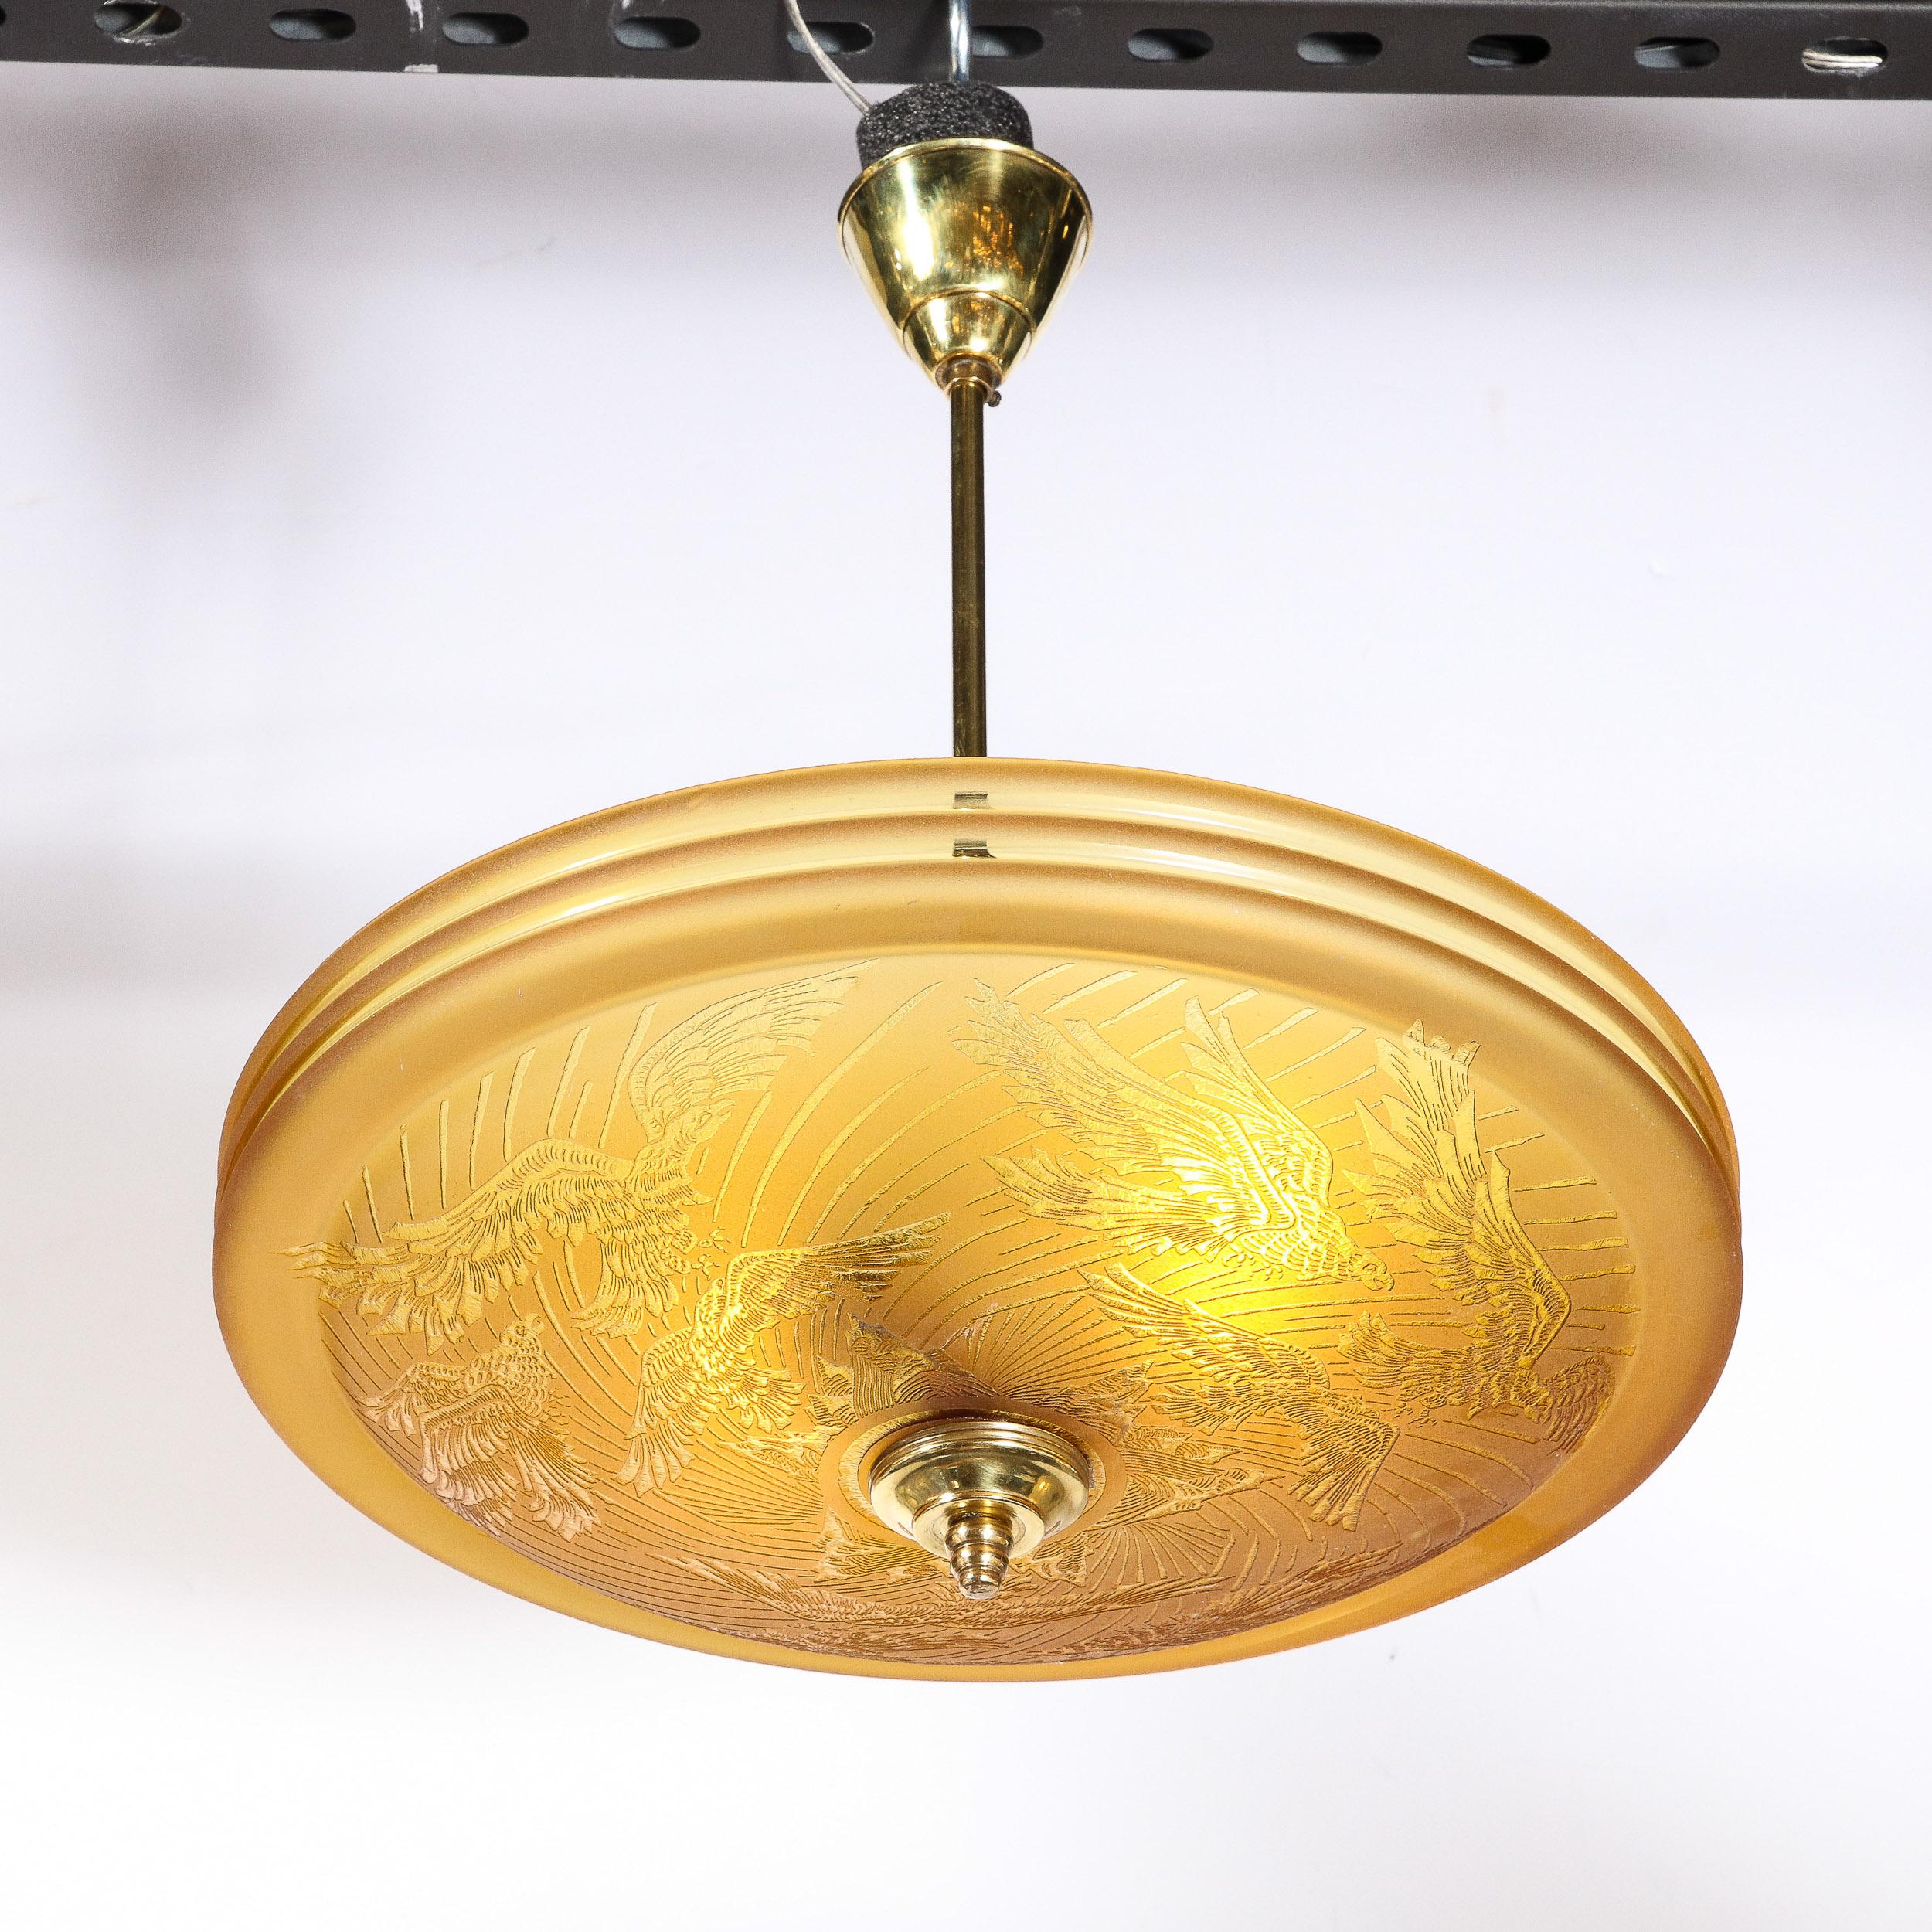 Art Deco Pendant Chandelier in Amber with Acid Etched  Motif by Deveau 3